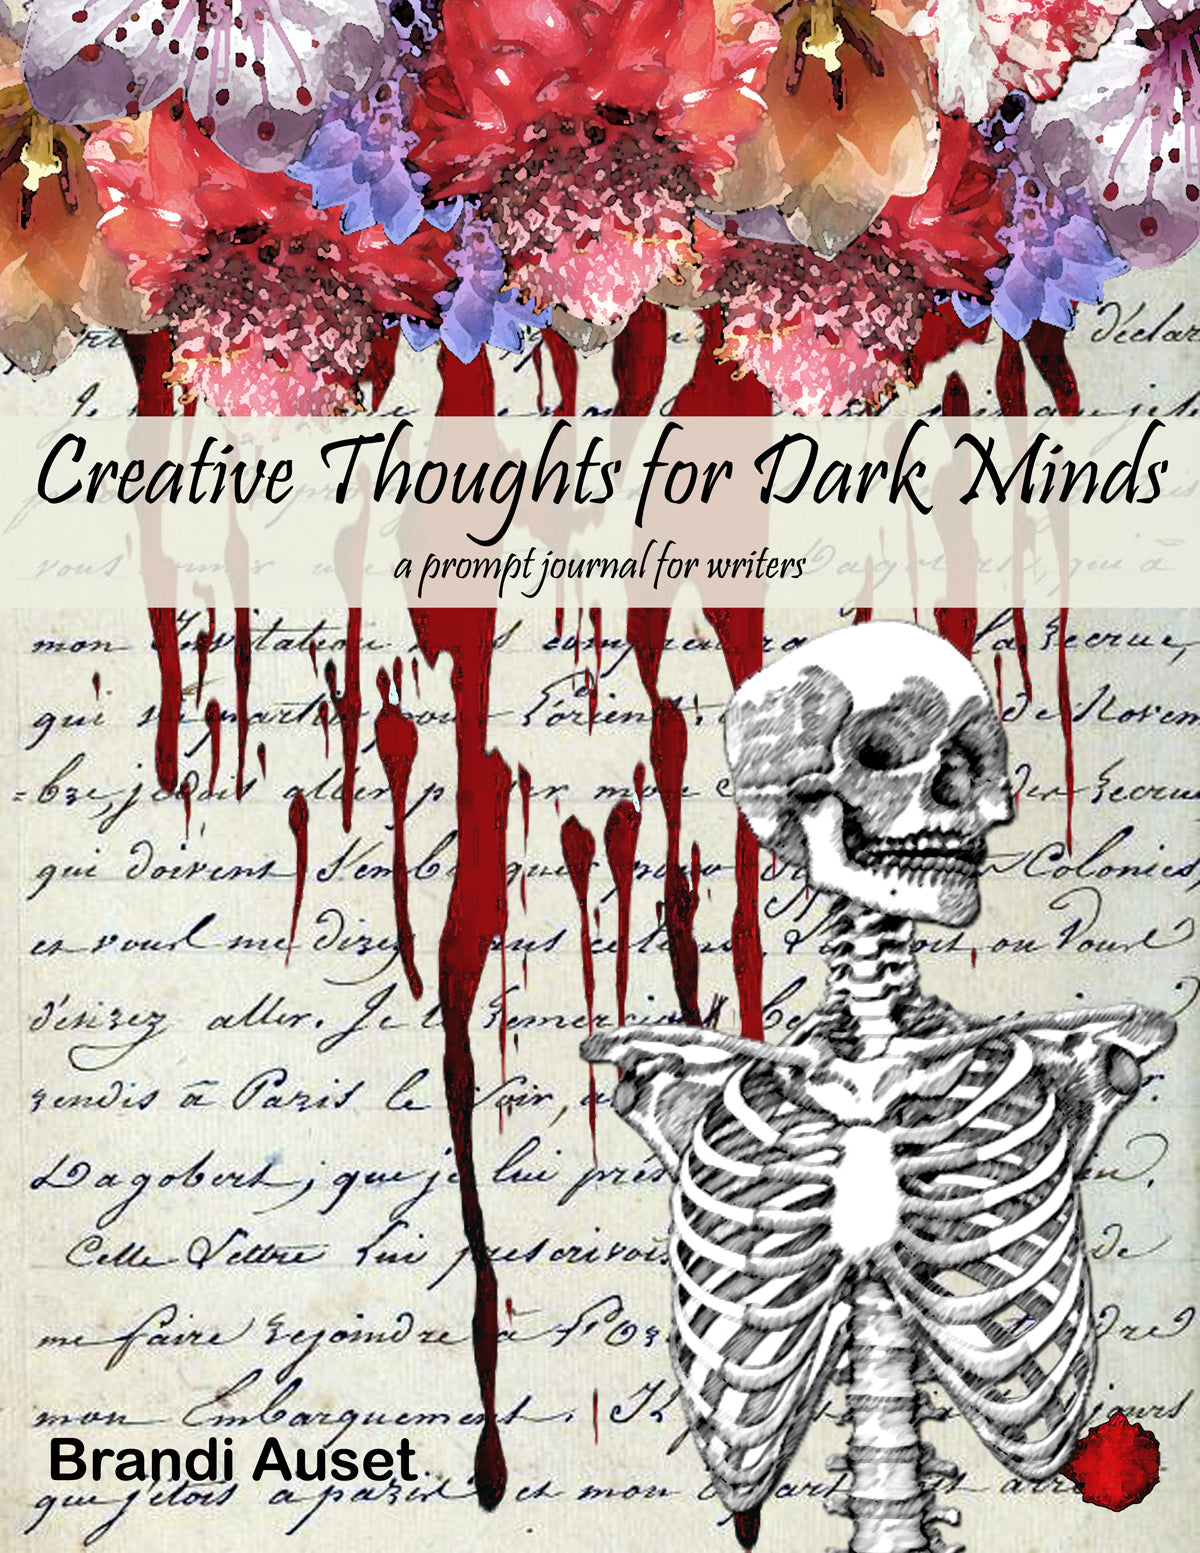 Creative Thoughts for Dark Minds: a prompt journal for writers